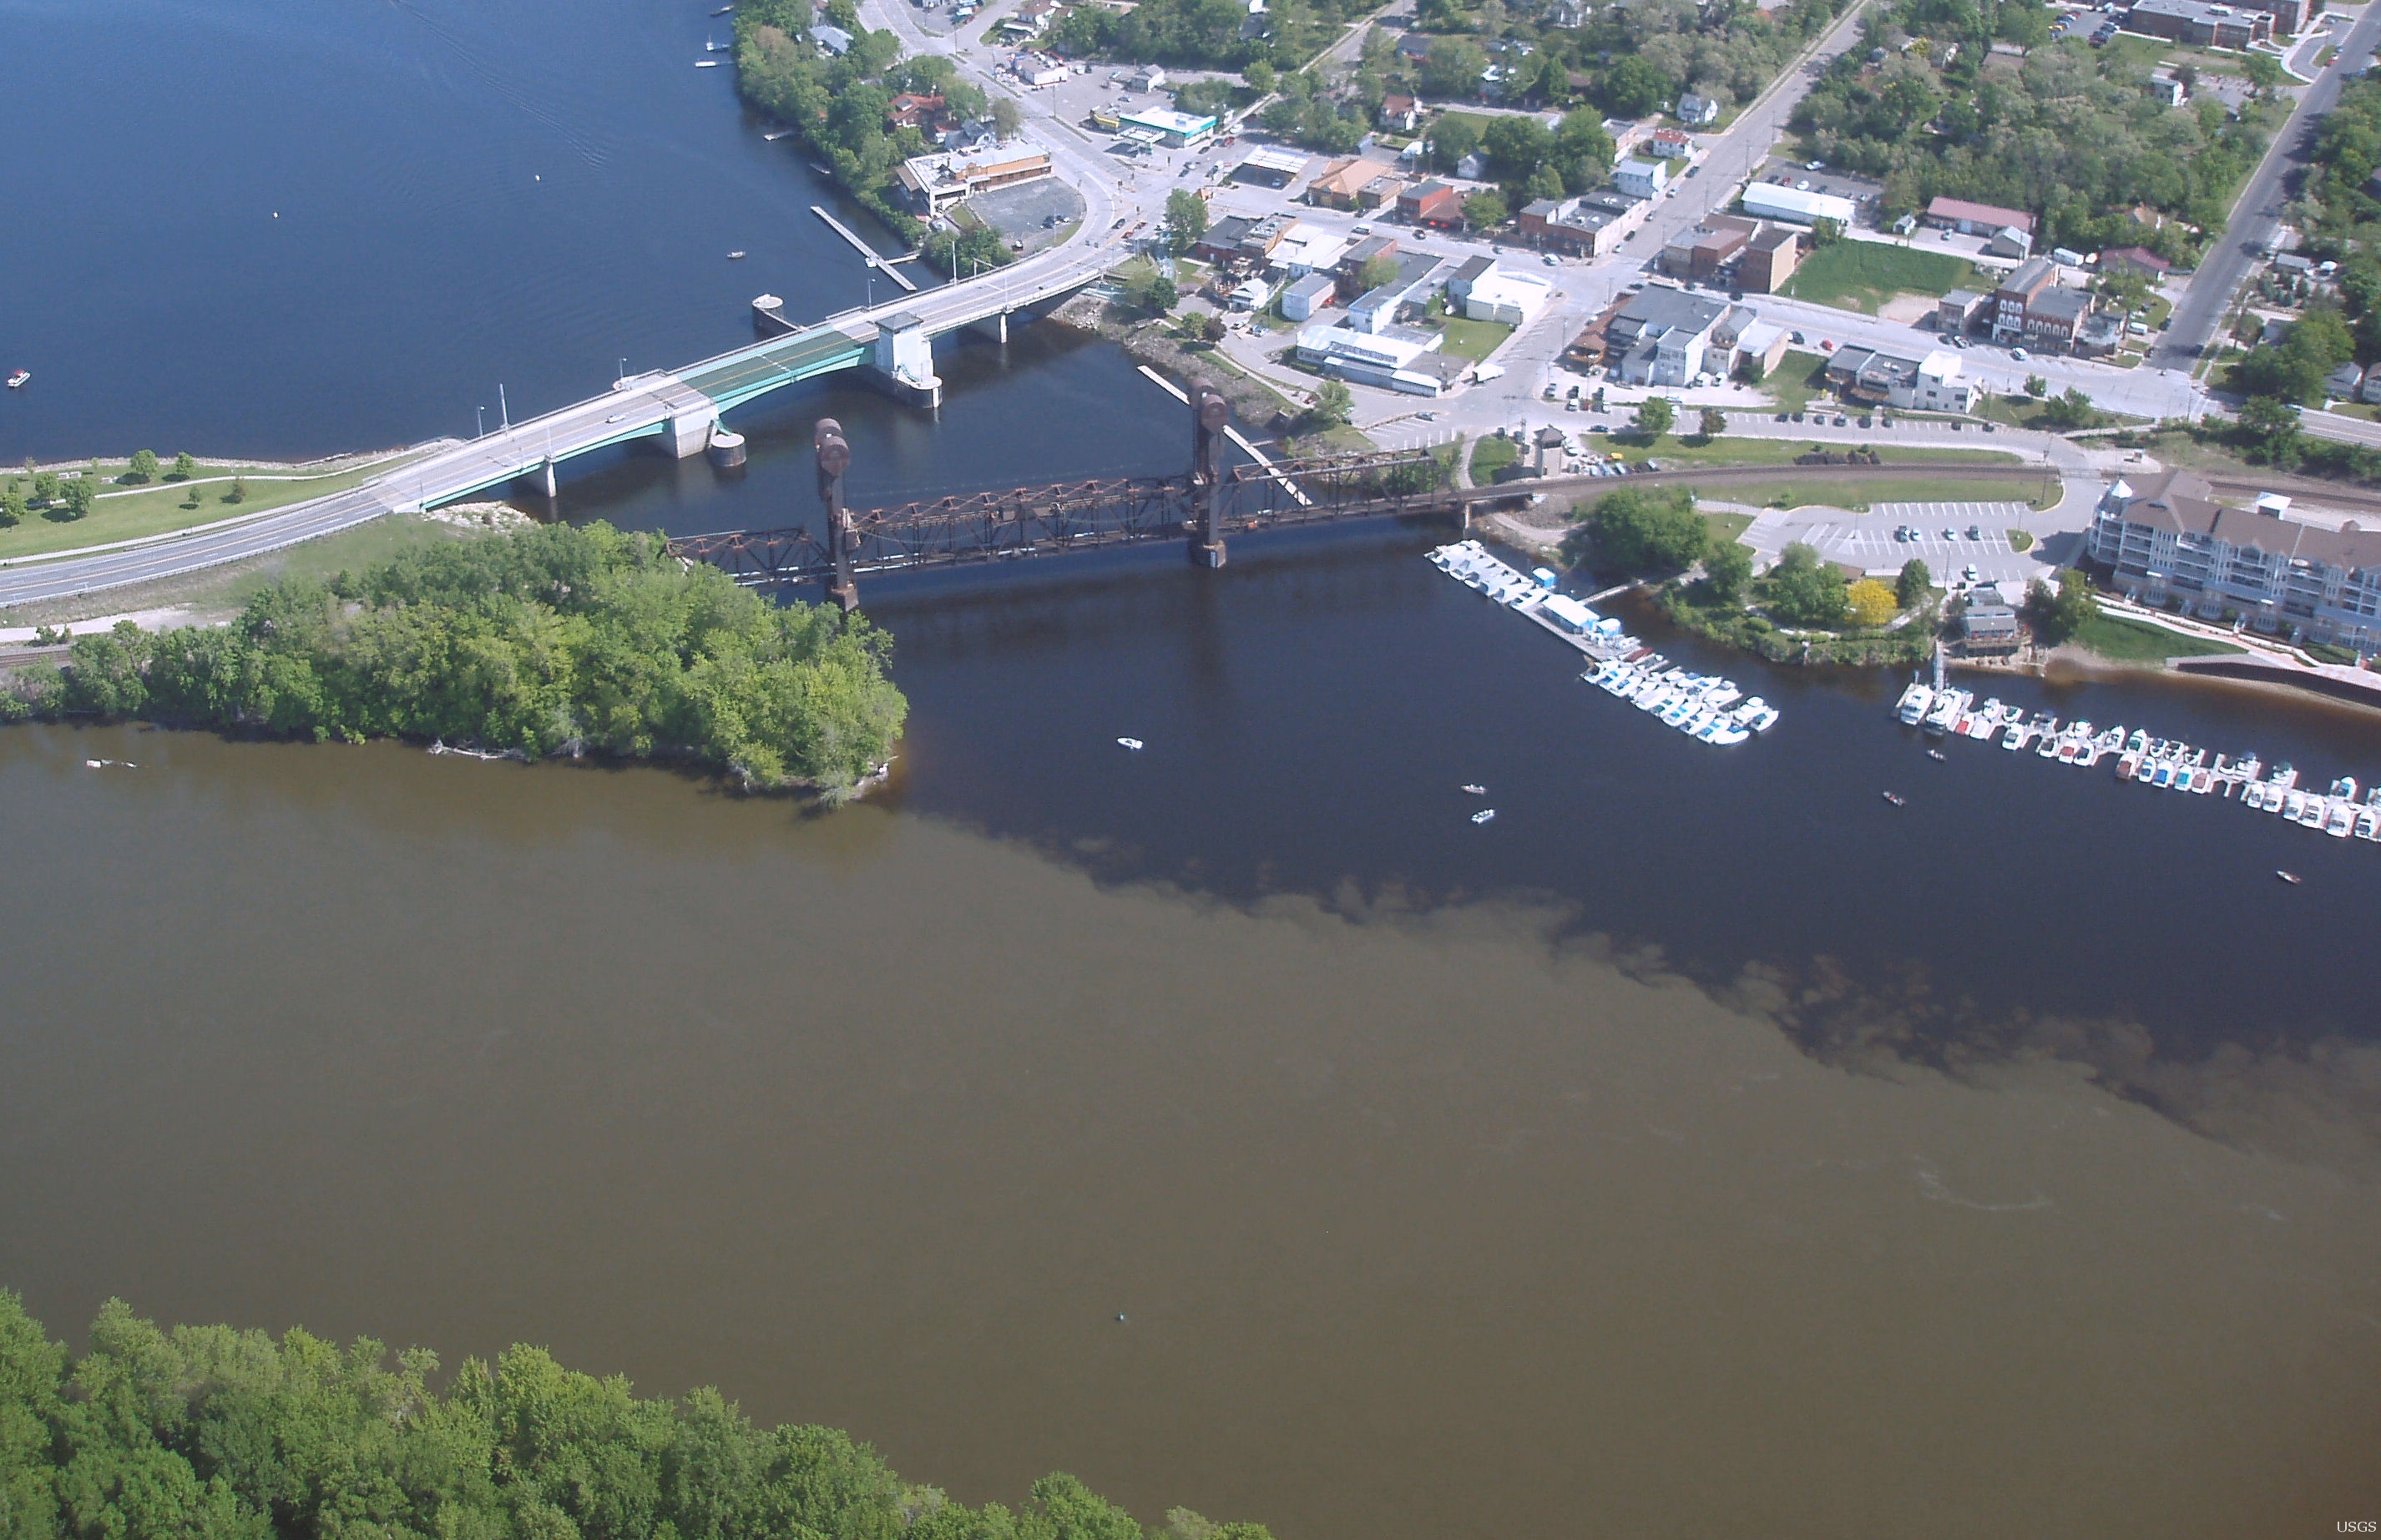 Prescott, Wisconsin, is just cross the St. Croix and Mississippi rivers from Minnesota. Photo is in the Public Domain.